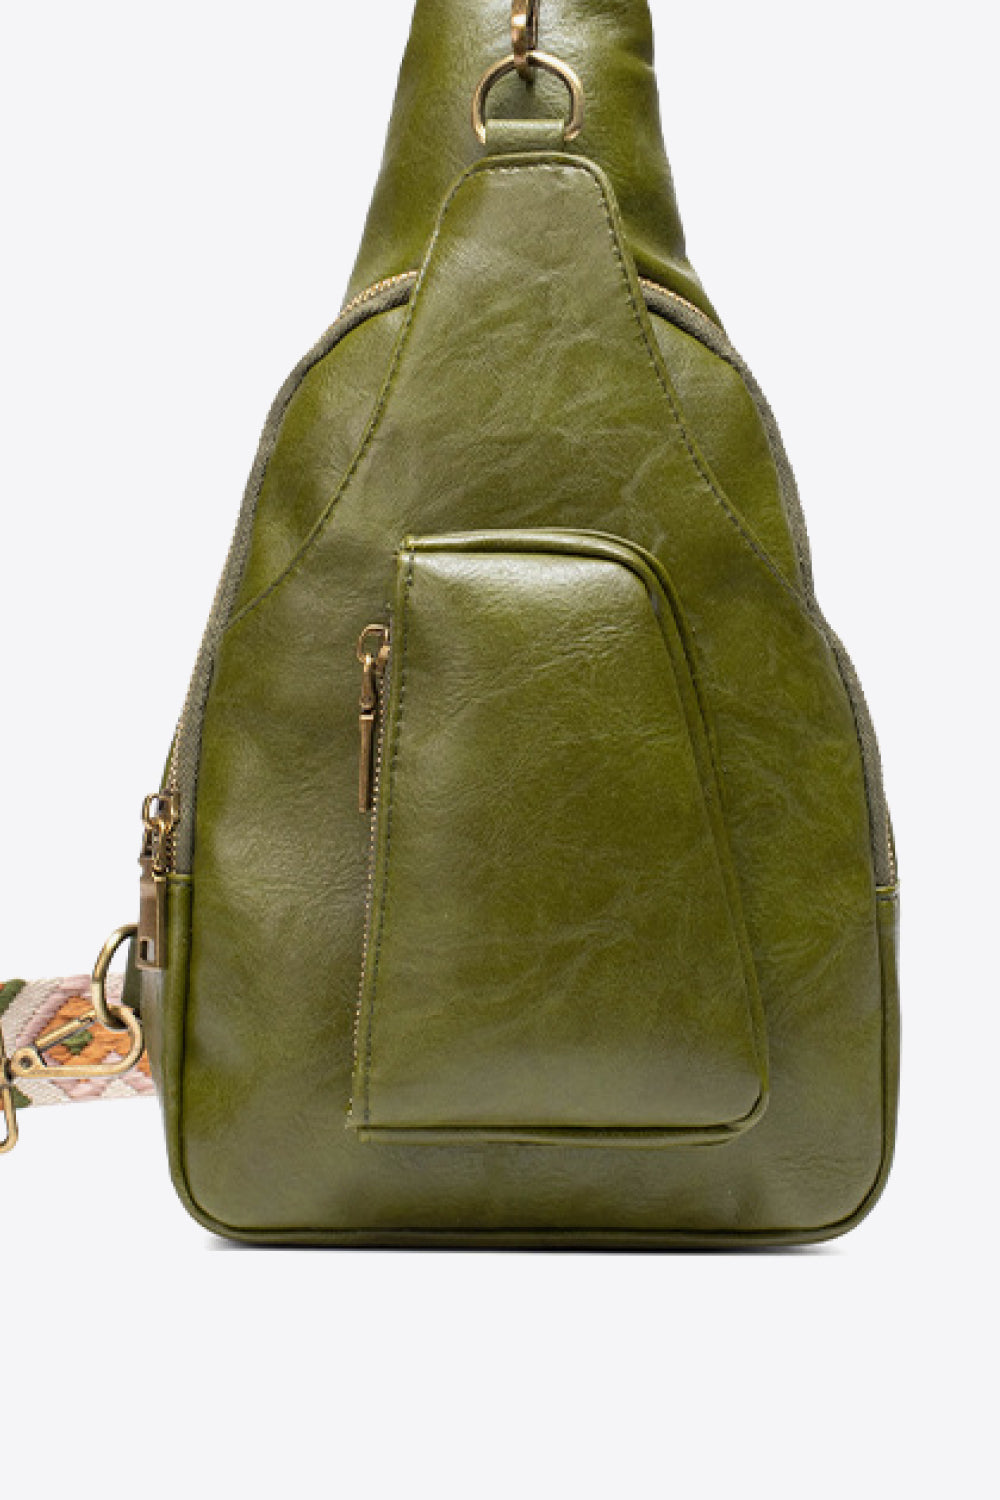 Dark Olive Green All The Feels PU Leather Sling Bag Sentient Beauty Fashions bags &amp; totes